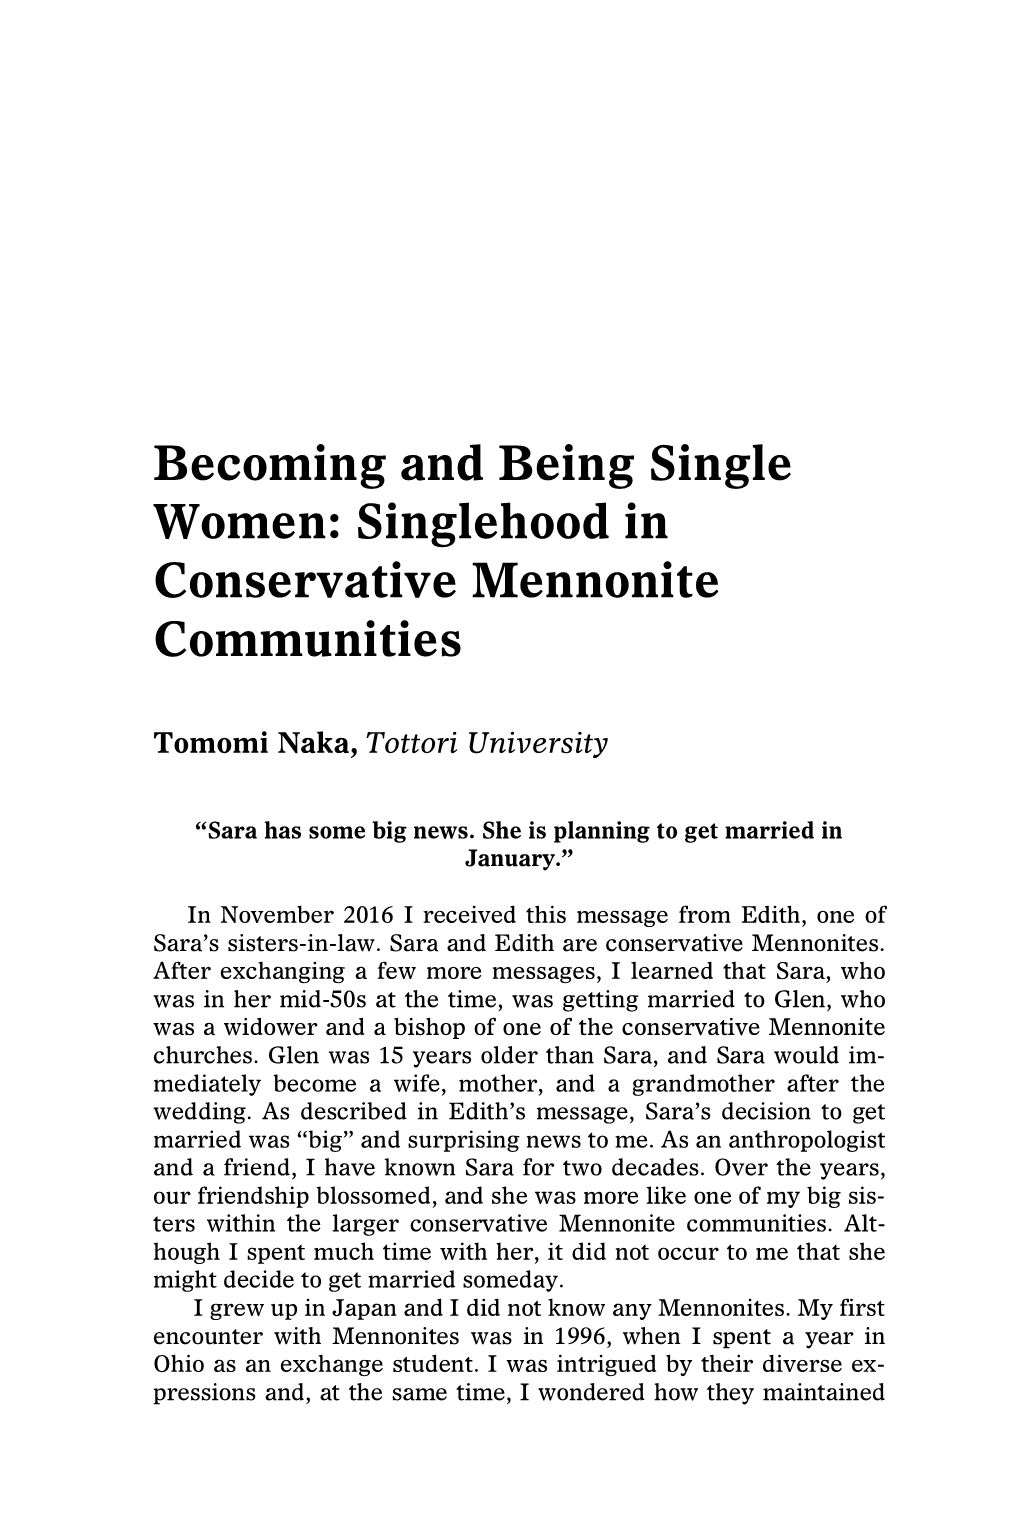 Becoming and Being Single Women: Singlehood in Conservative Mennonite Communities